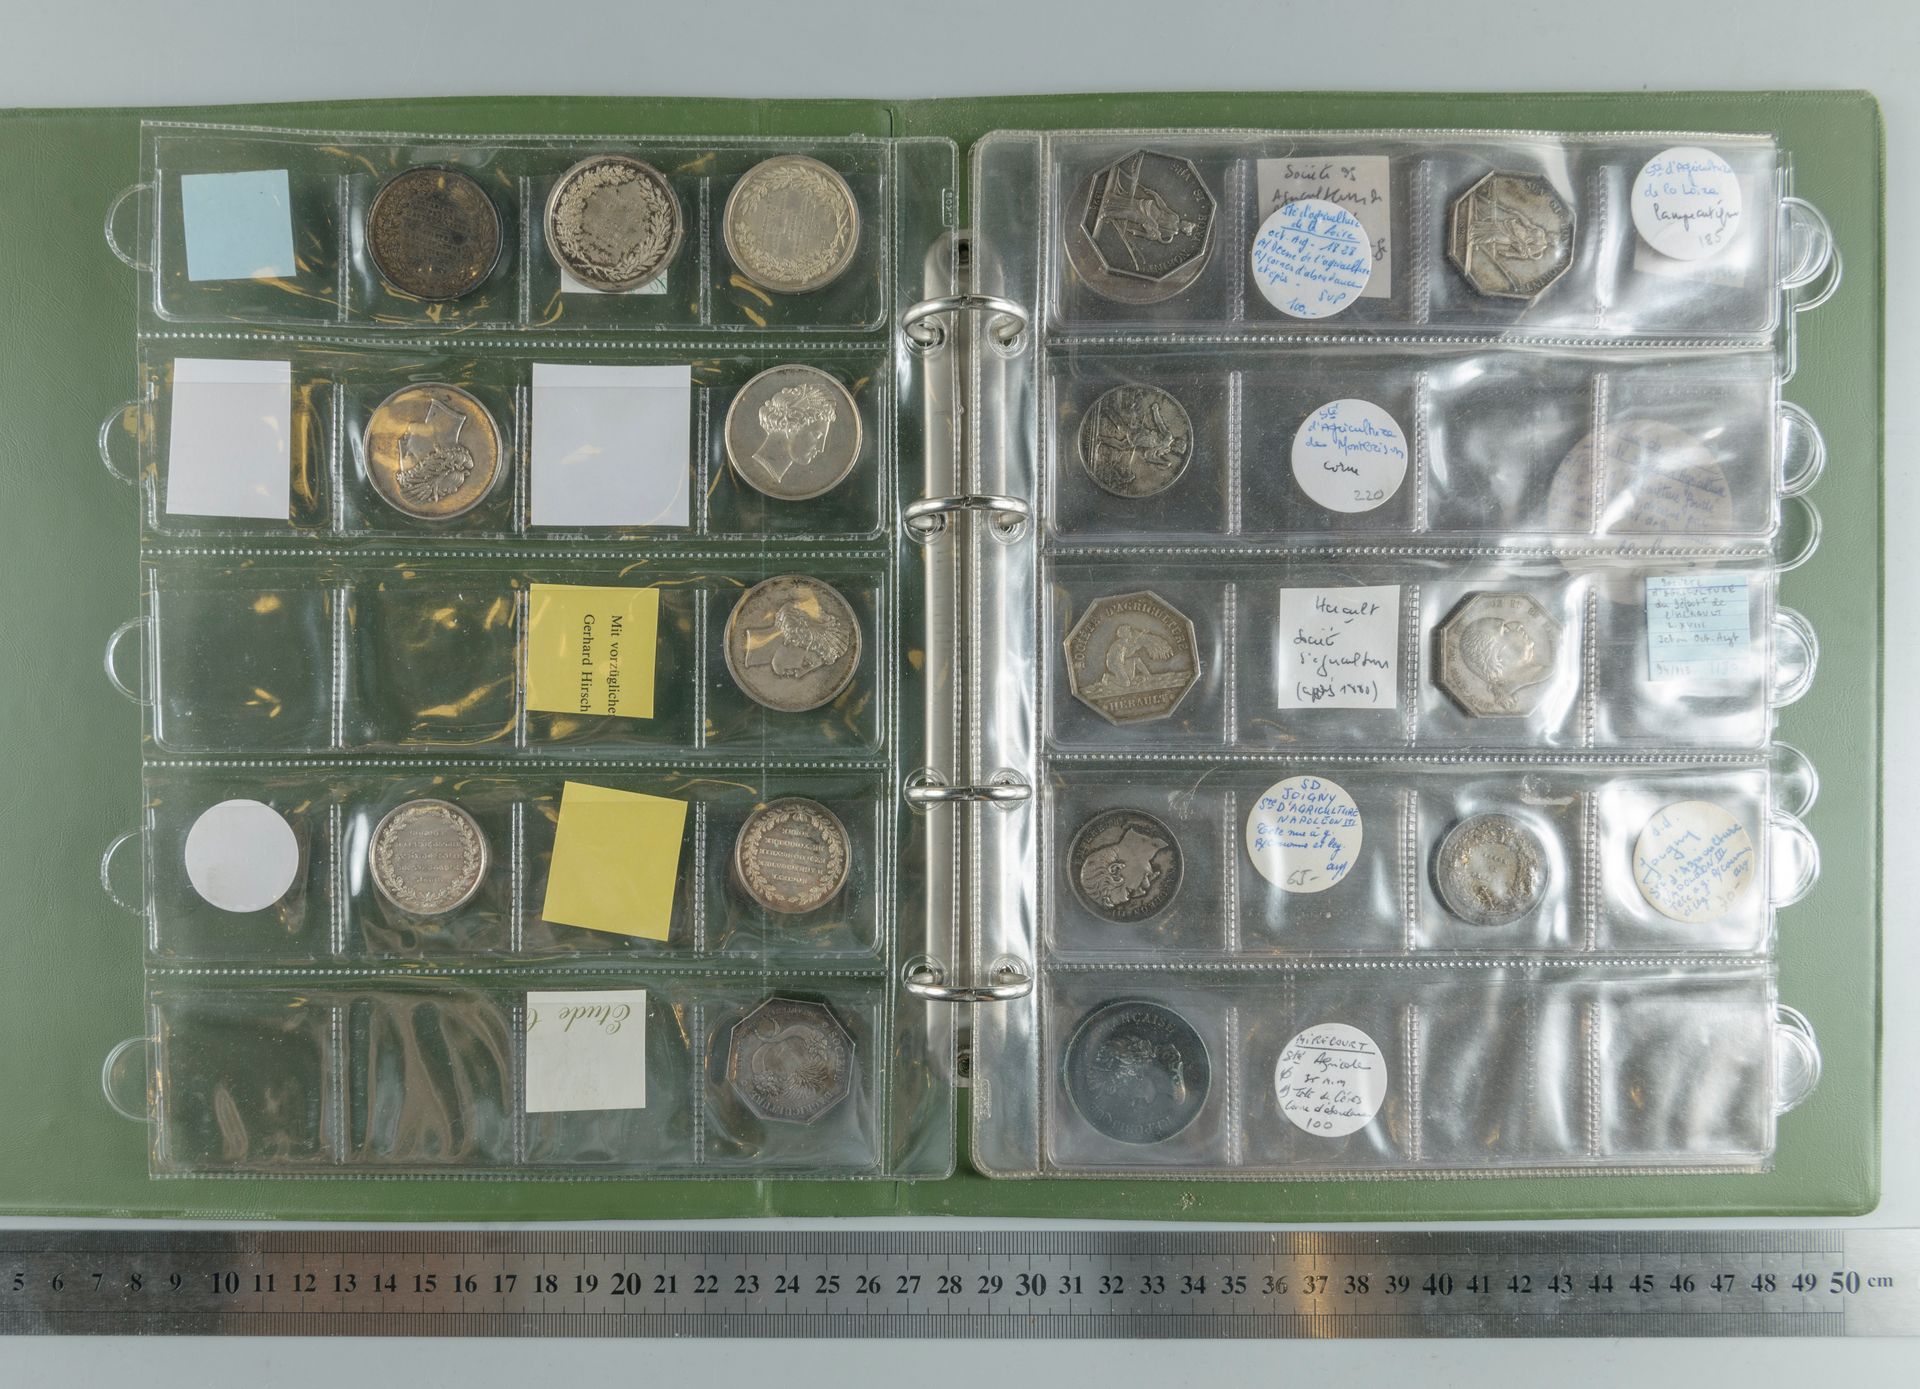 Null Agricultural Societies. Binder with 19 silver tokens and medals